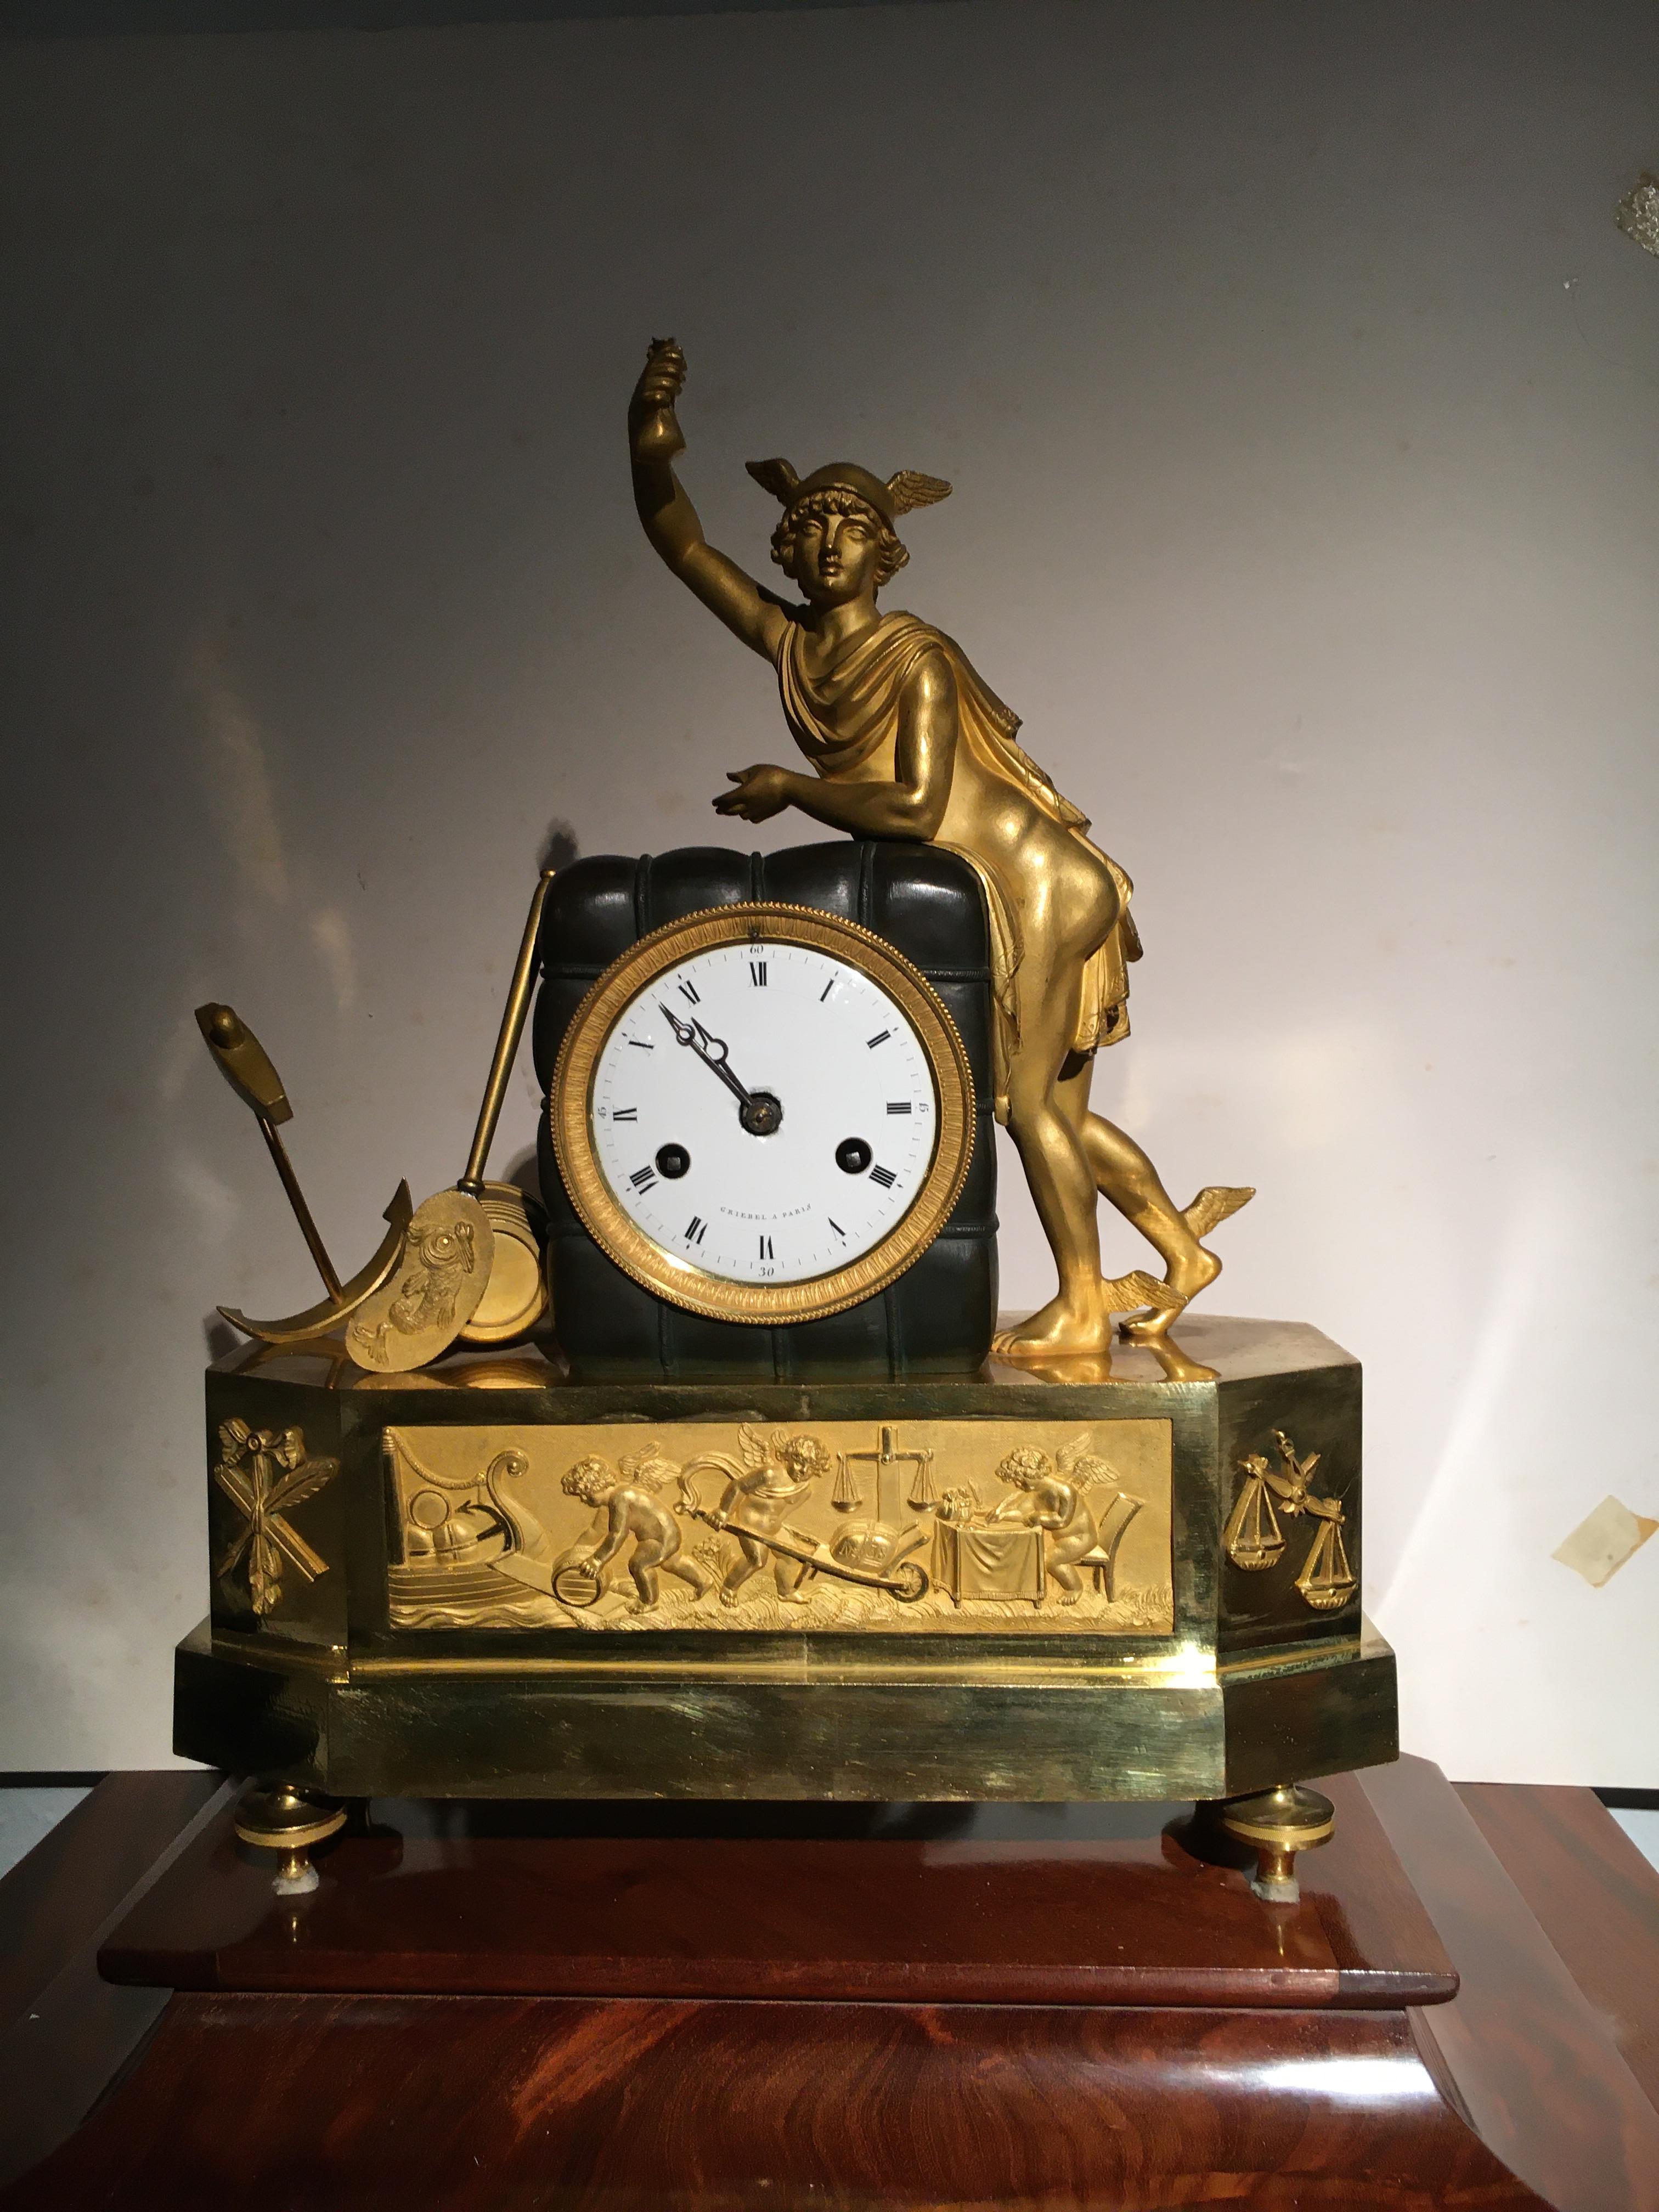 
French mantel clock  representing with the figure of Hermes and other trade symbols, in bronze with its original gilt  and green patina.
Signed at dial 